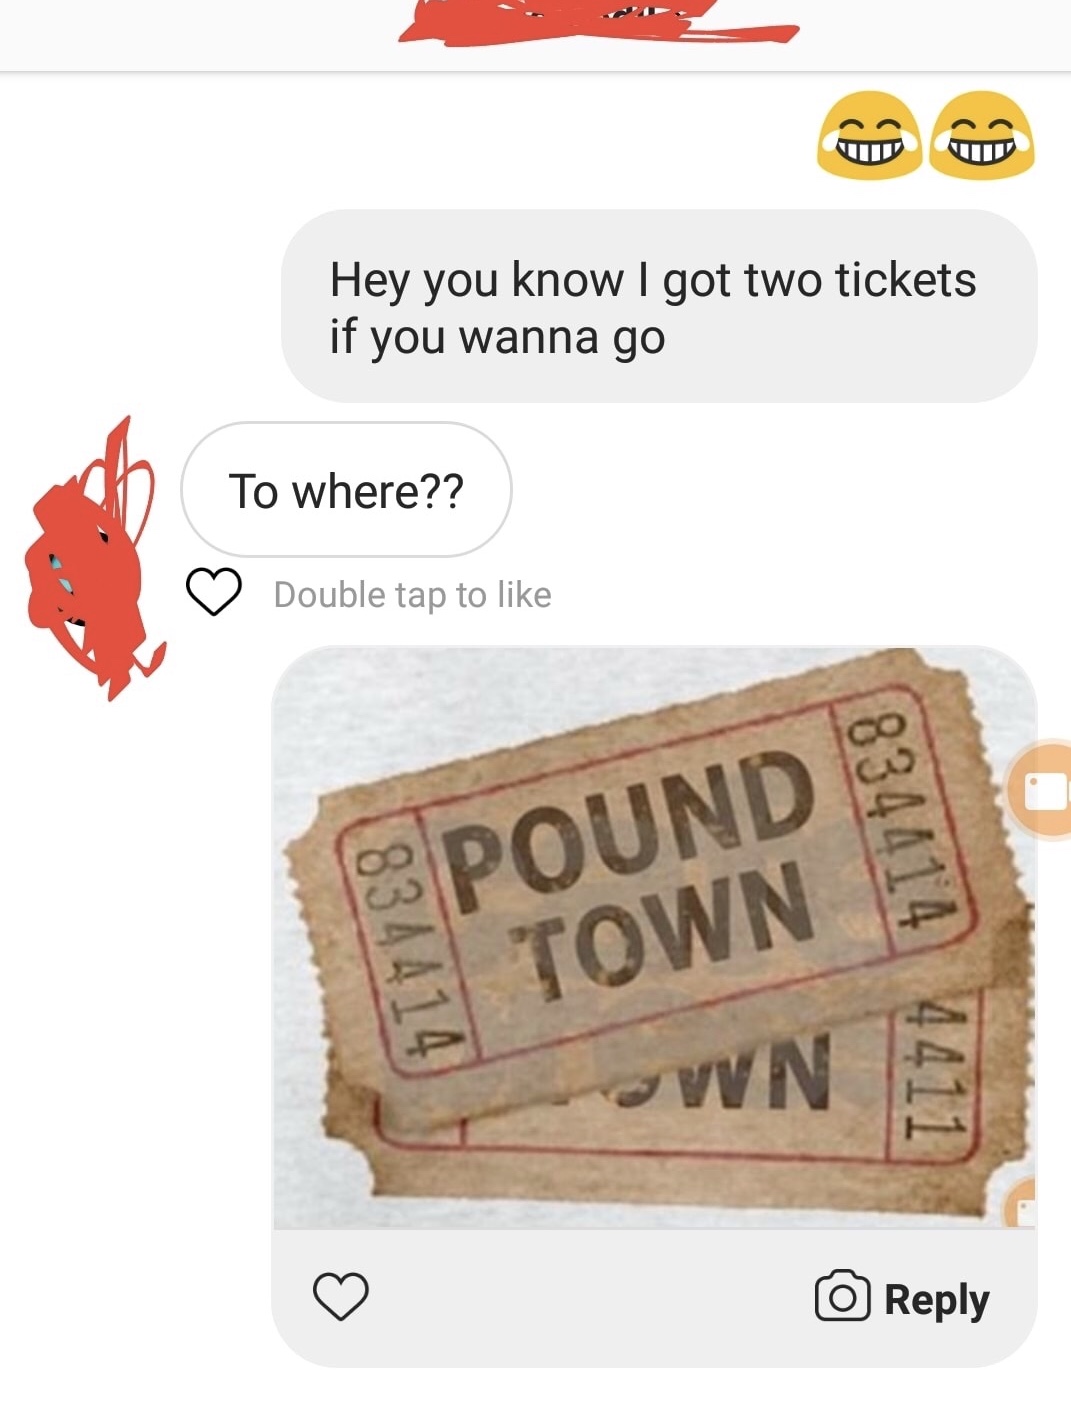 memes - two tickets to pound town - Vu Hey you know I got two tickets if you wanna go To where?? Double tap to 834414 Pound Town 834414 4411 Vn